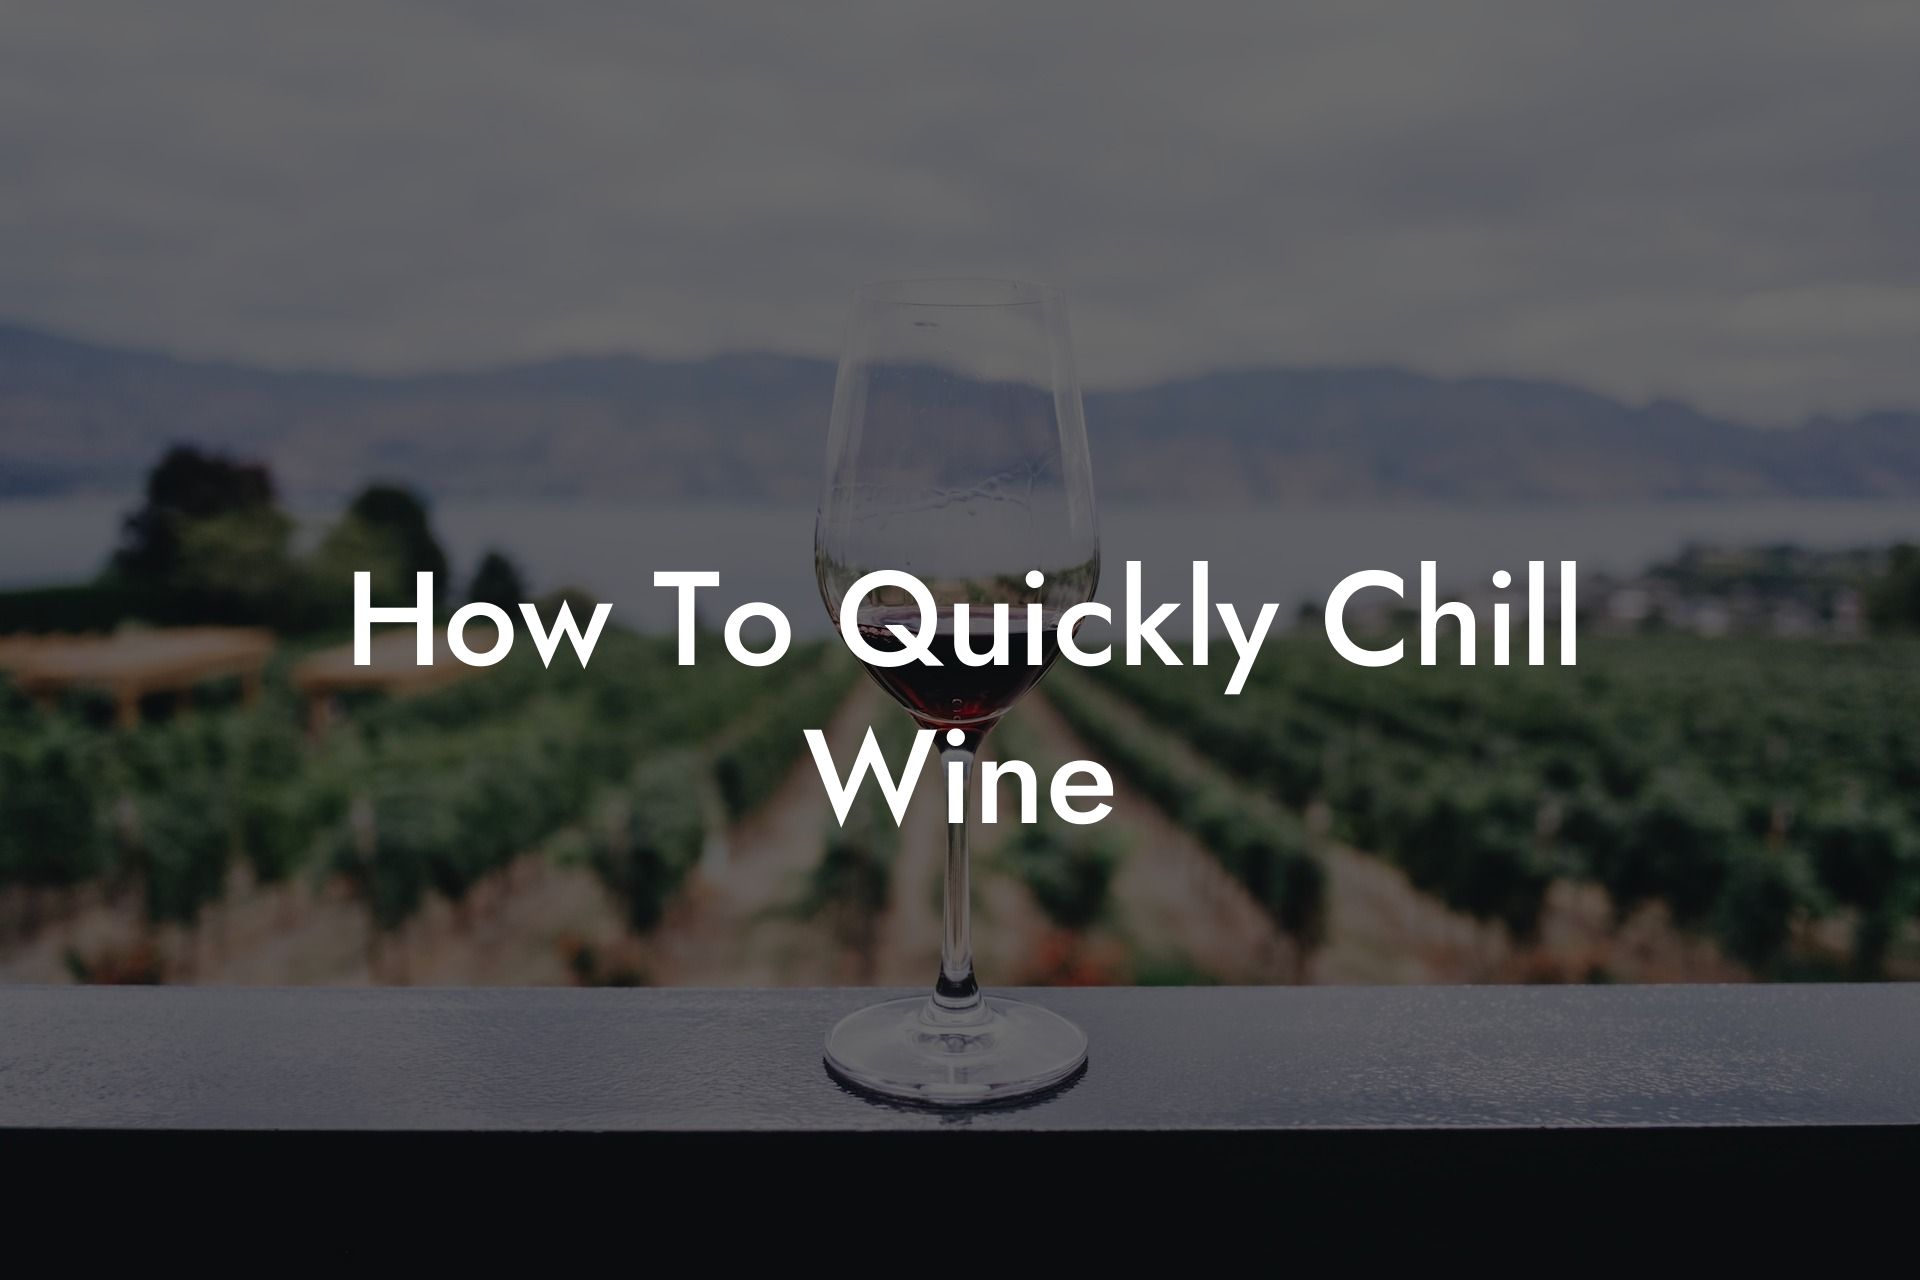 How To Quickly Chill Wine